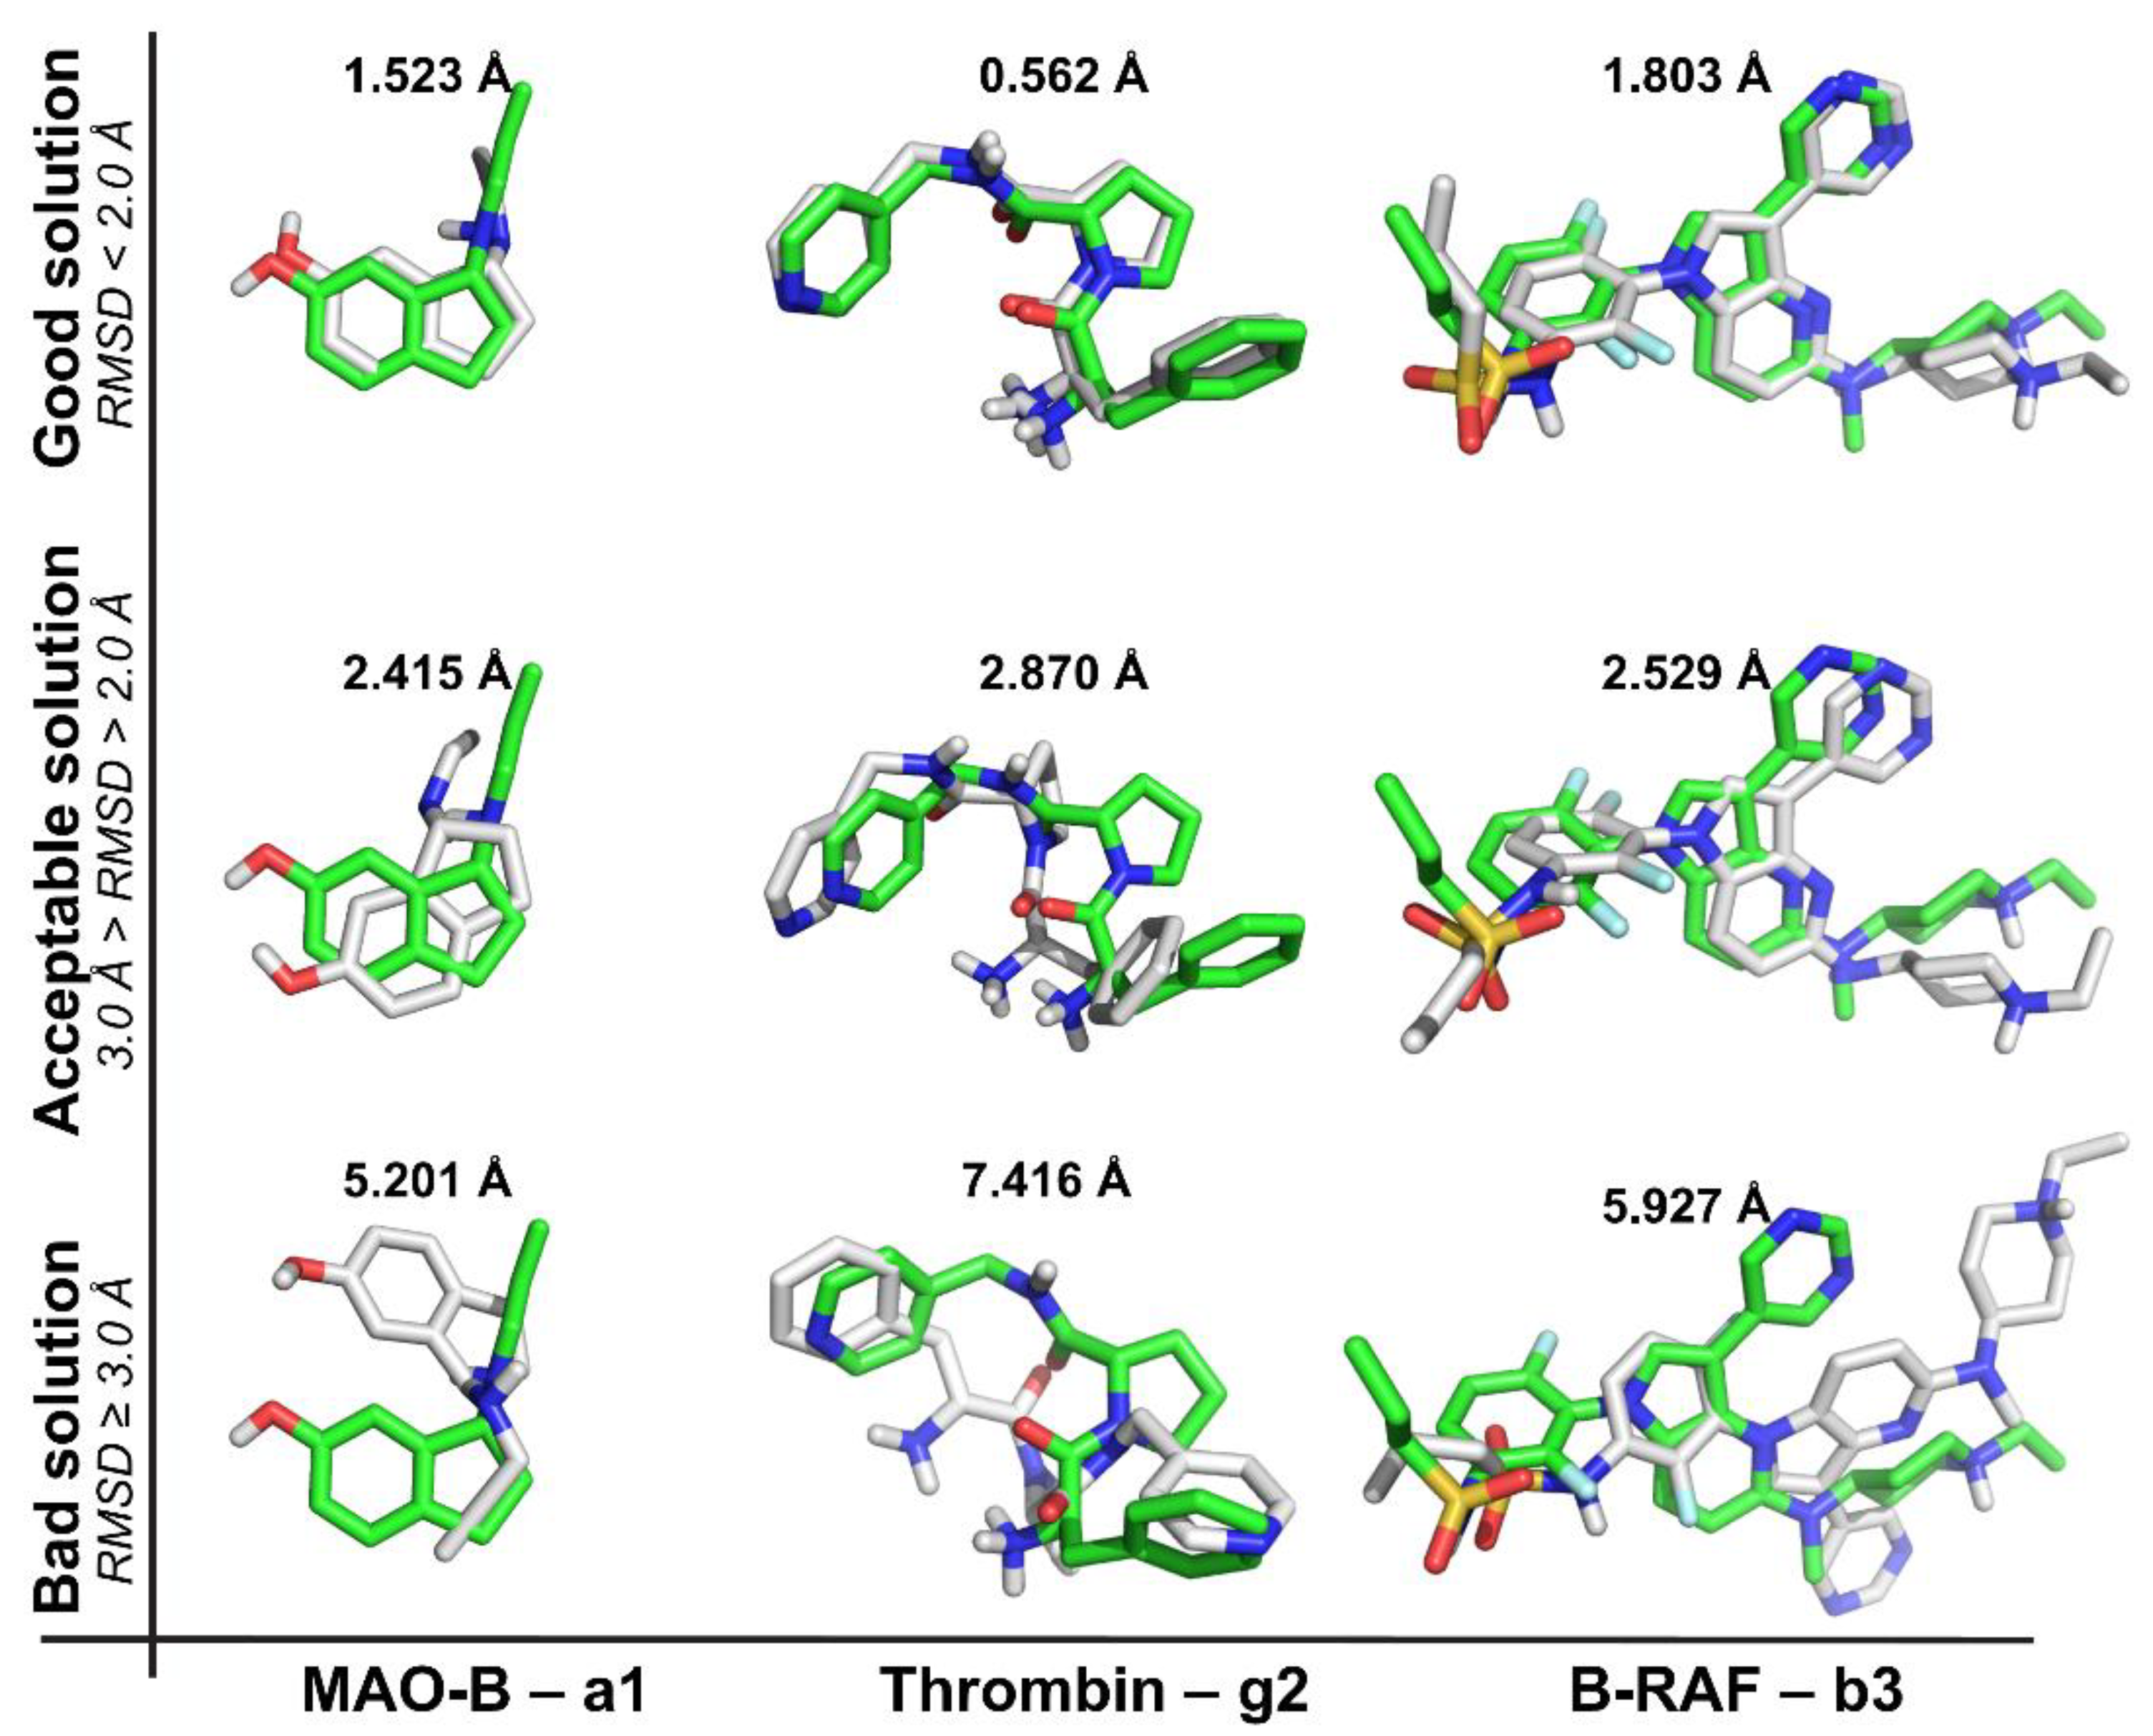 Molecules Free Full Text Is It Reliable To Take The Molecular Docking Top Scoring Position As The Best Solution Without Considering Available Structural Data Html